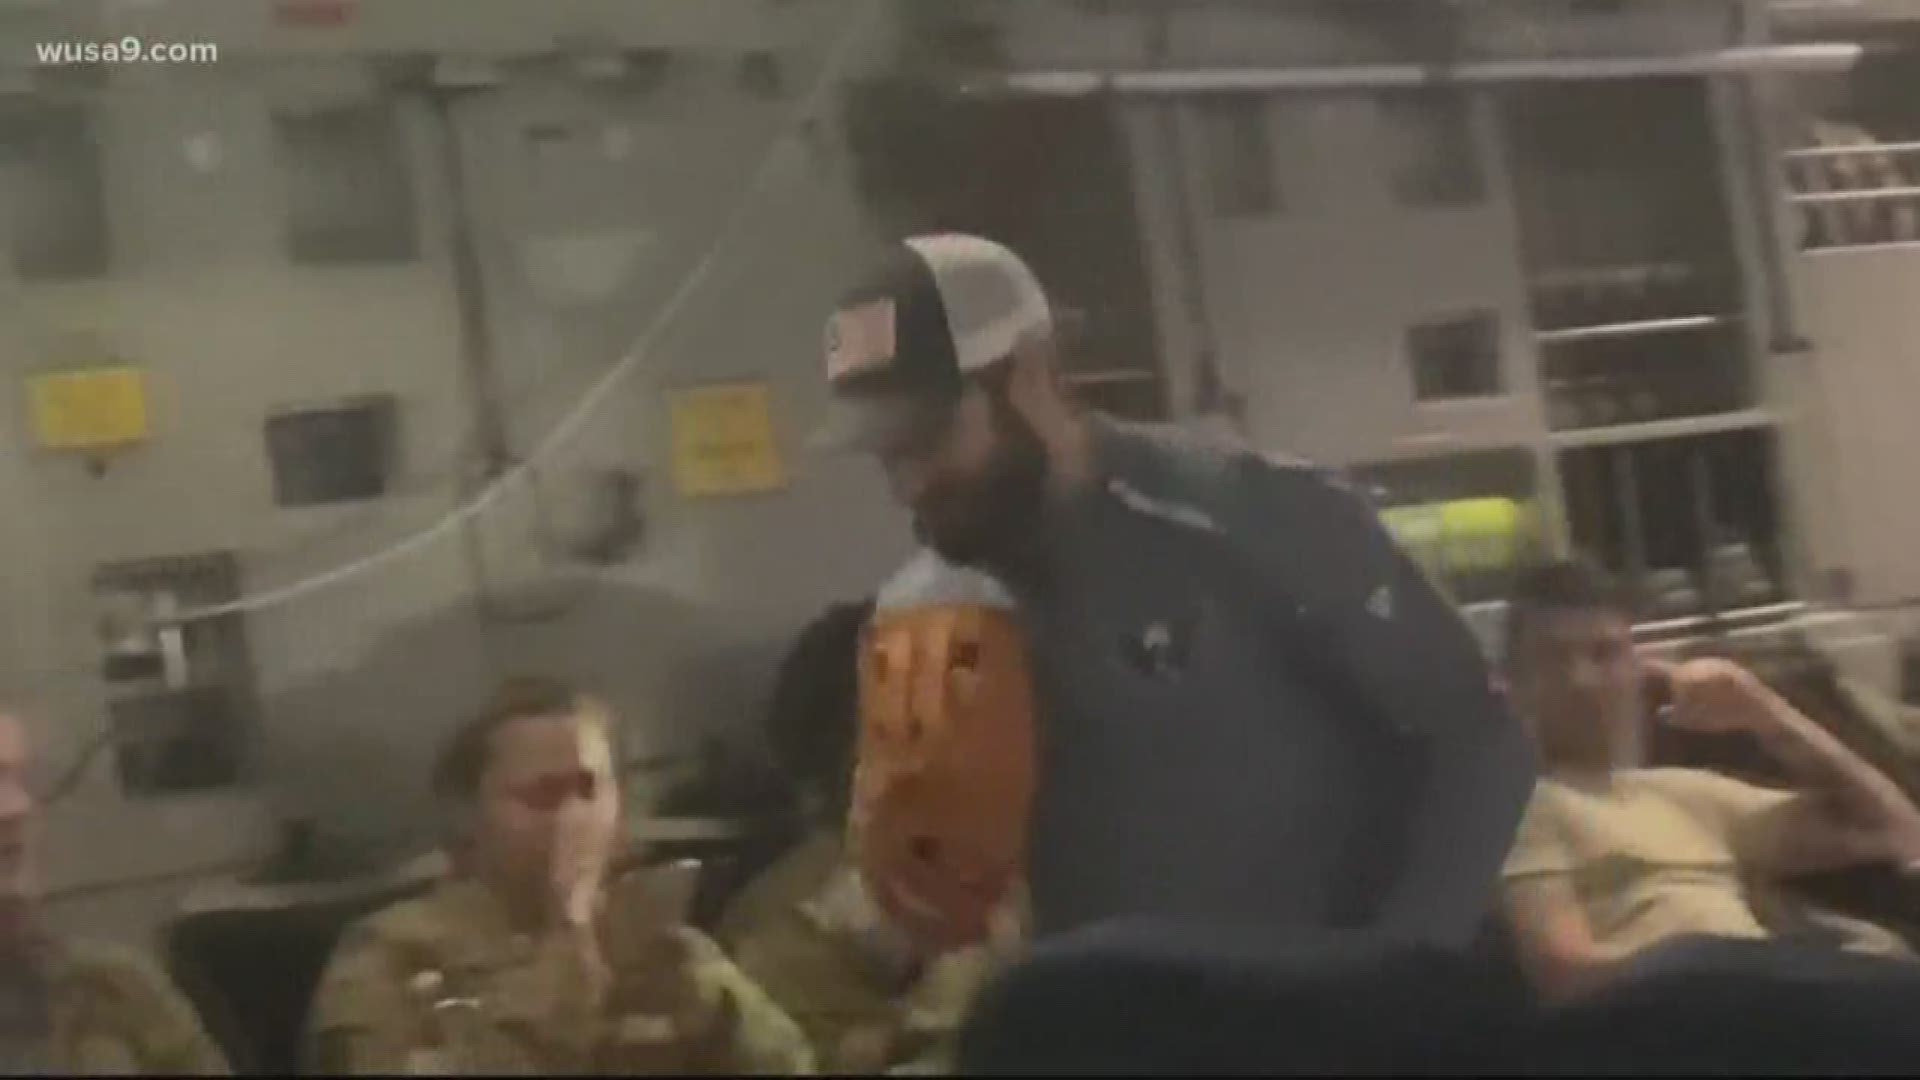 After being inspired by former Dolphins quarterback Dan Marino, the Nationals Adam Eaton and Aaron Barrett played catch on a C-17 military plane.